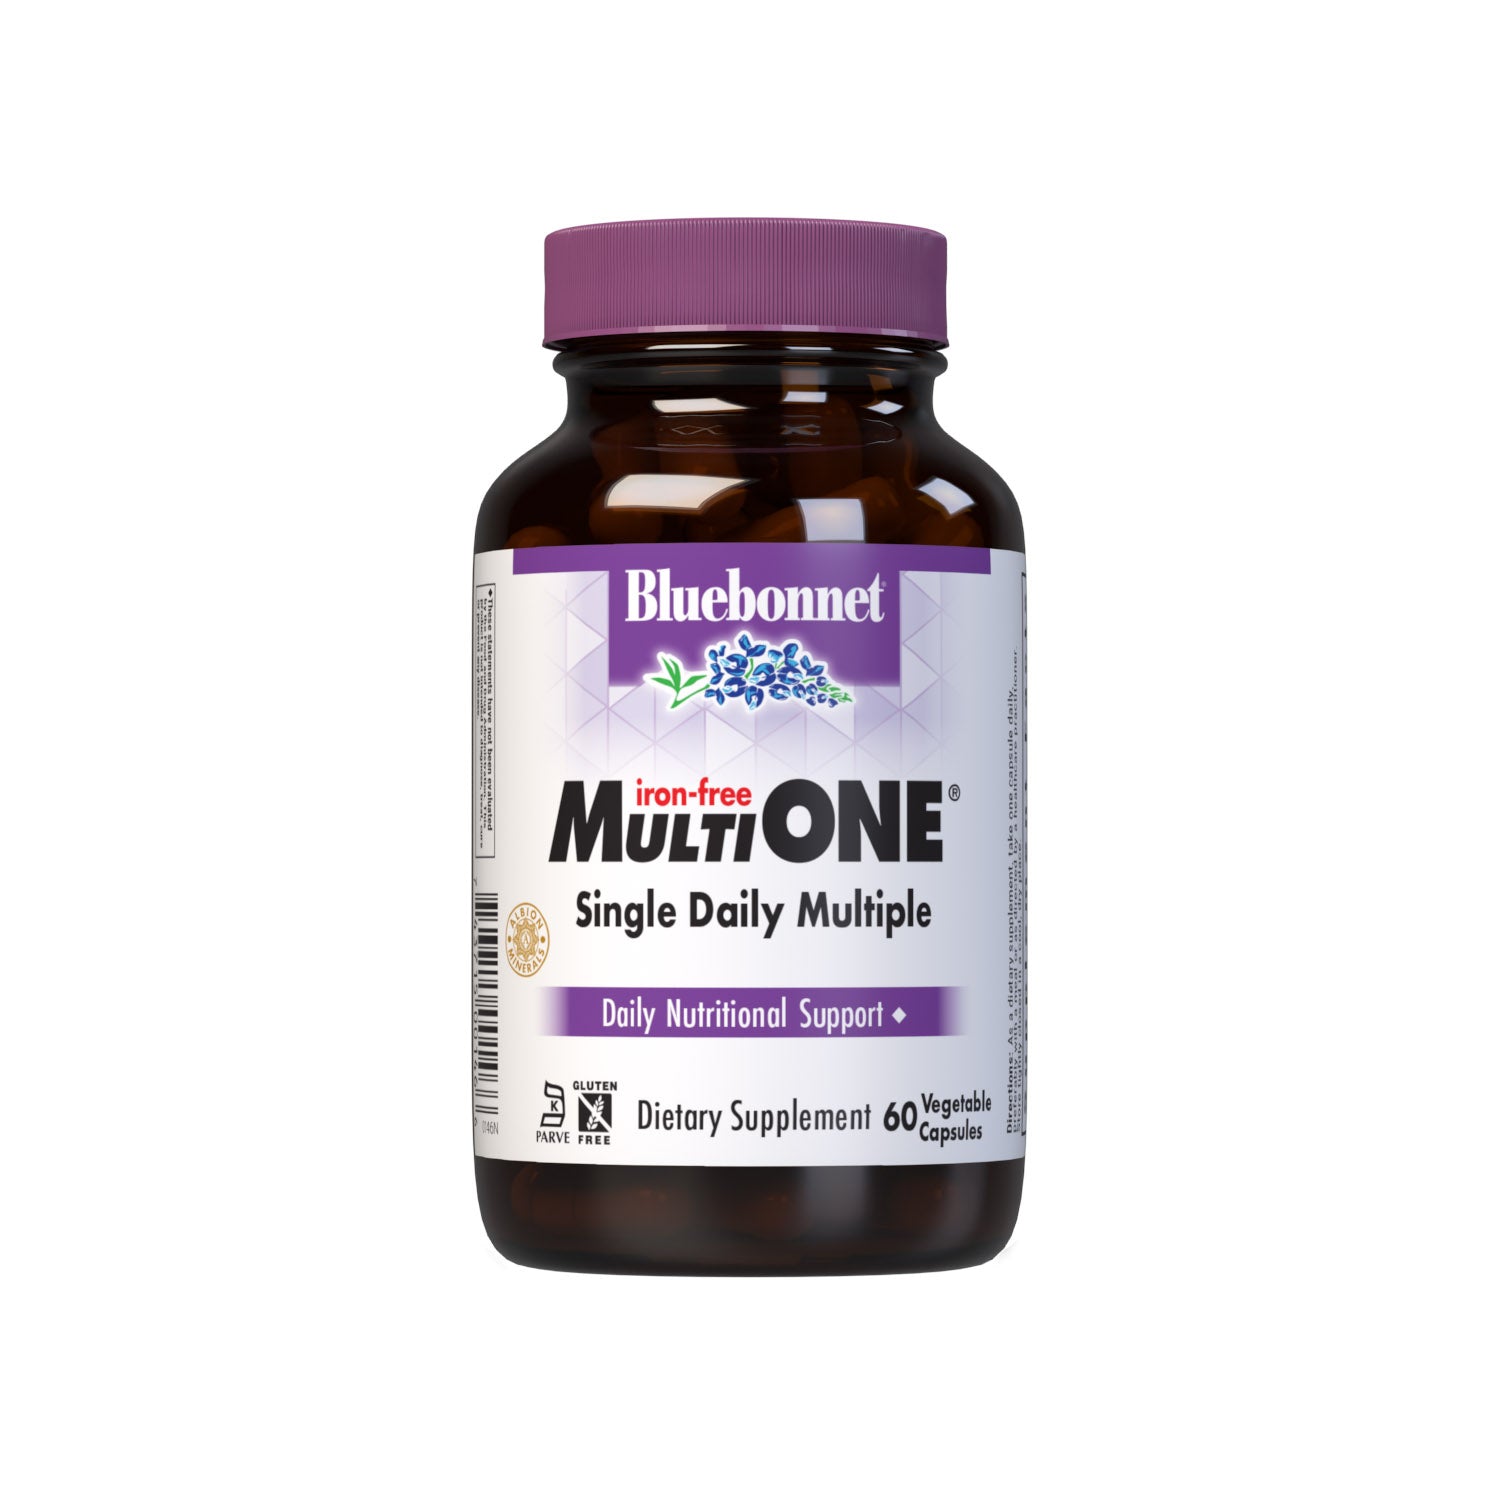 Bluebonnet’s Multi One Iron-free Single Daily Multiple 60 vegetable capsules is formulated with crucial vitamins and minerals, plus Albion chelated minerals for daily nutrition and well being. #size_60 count